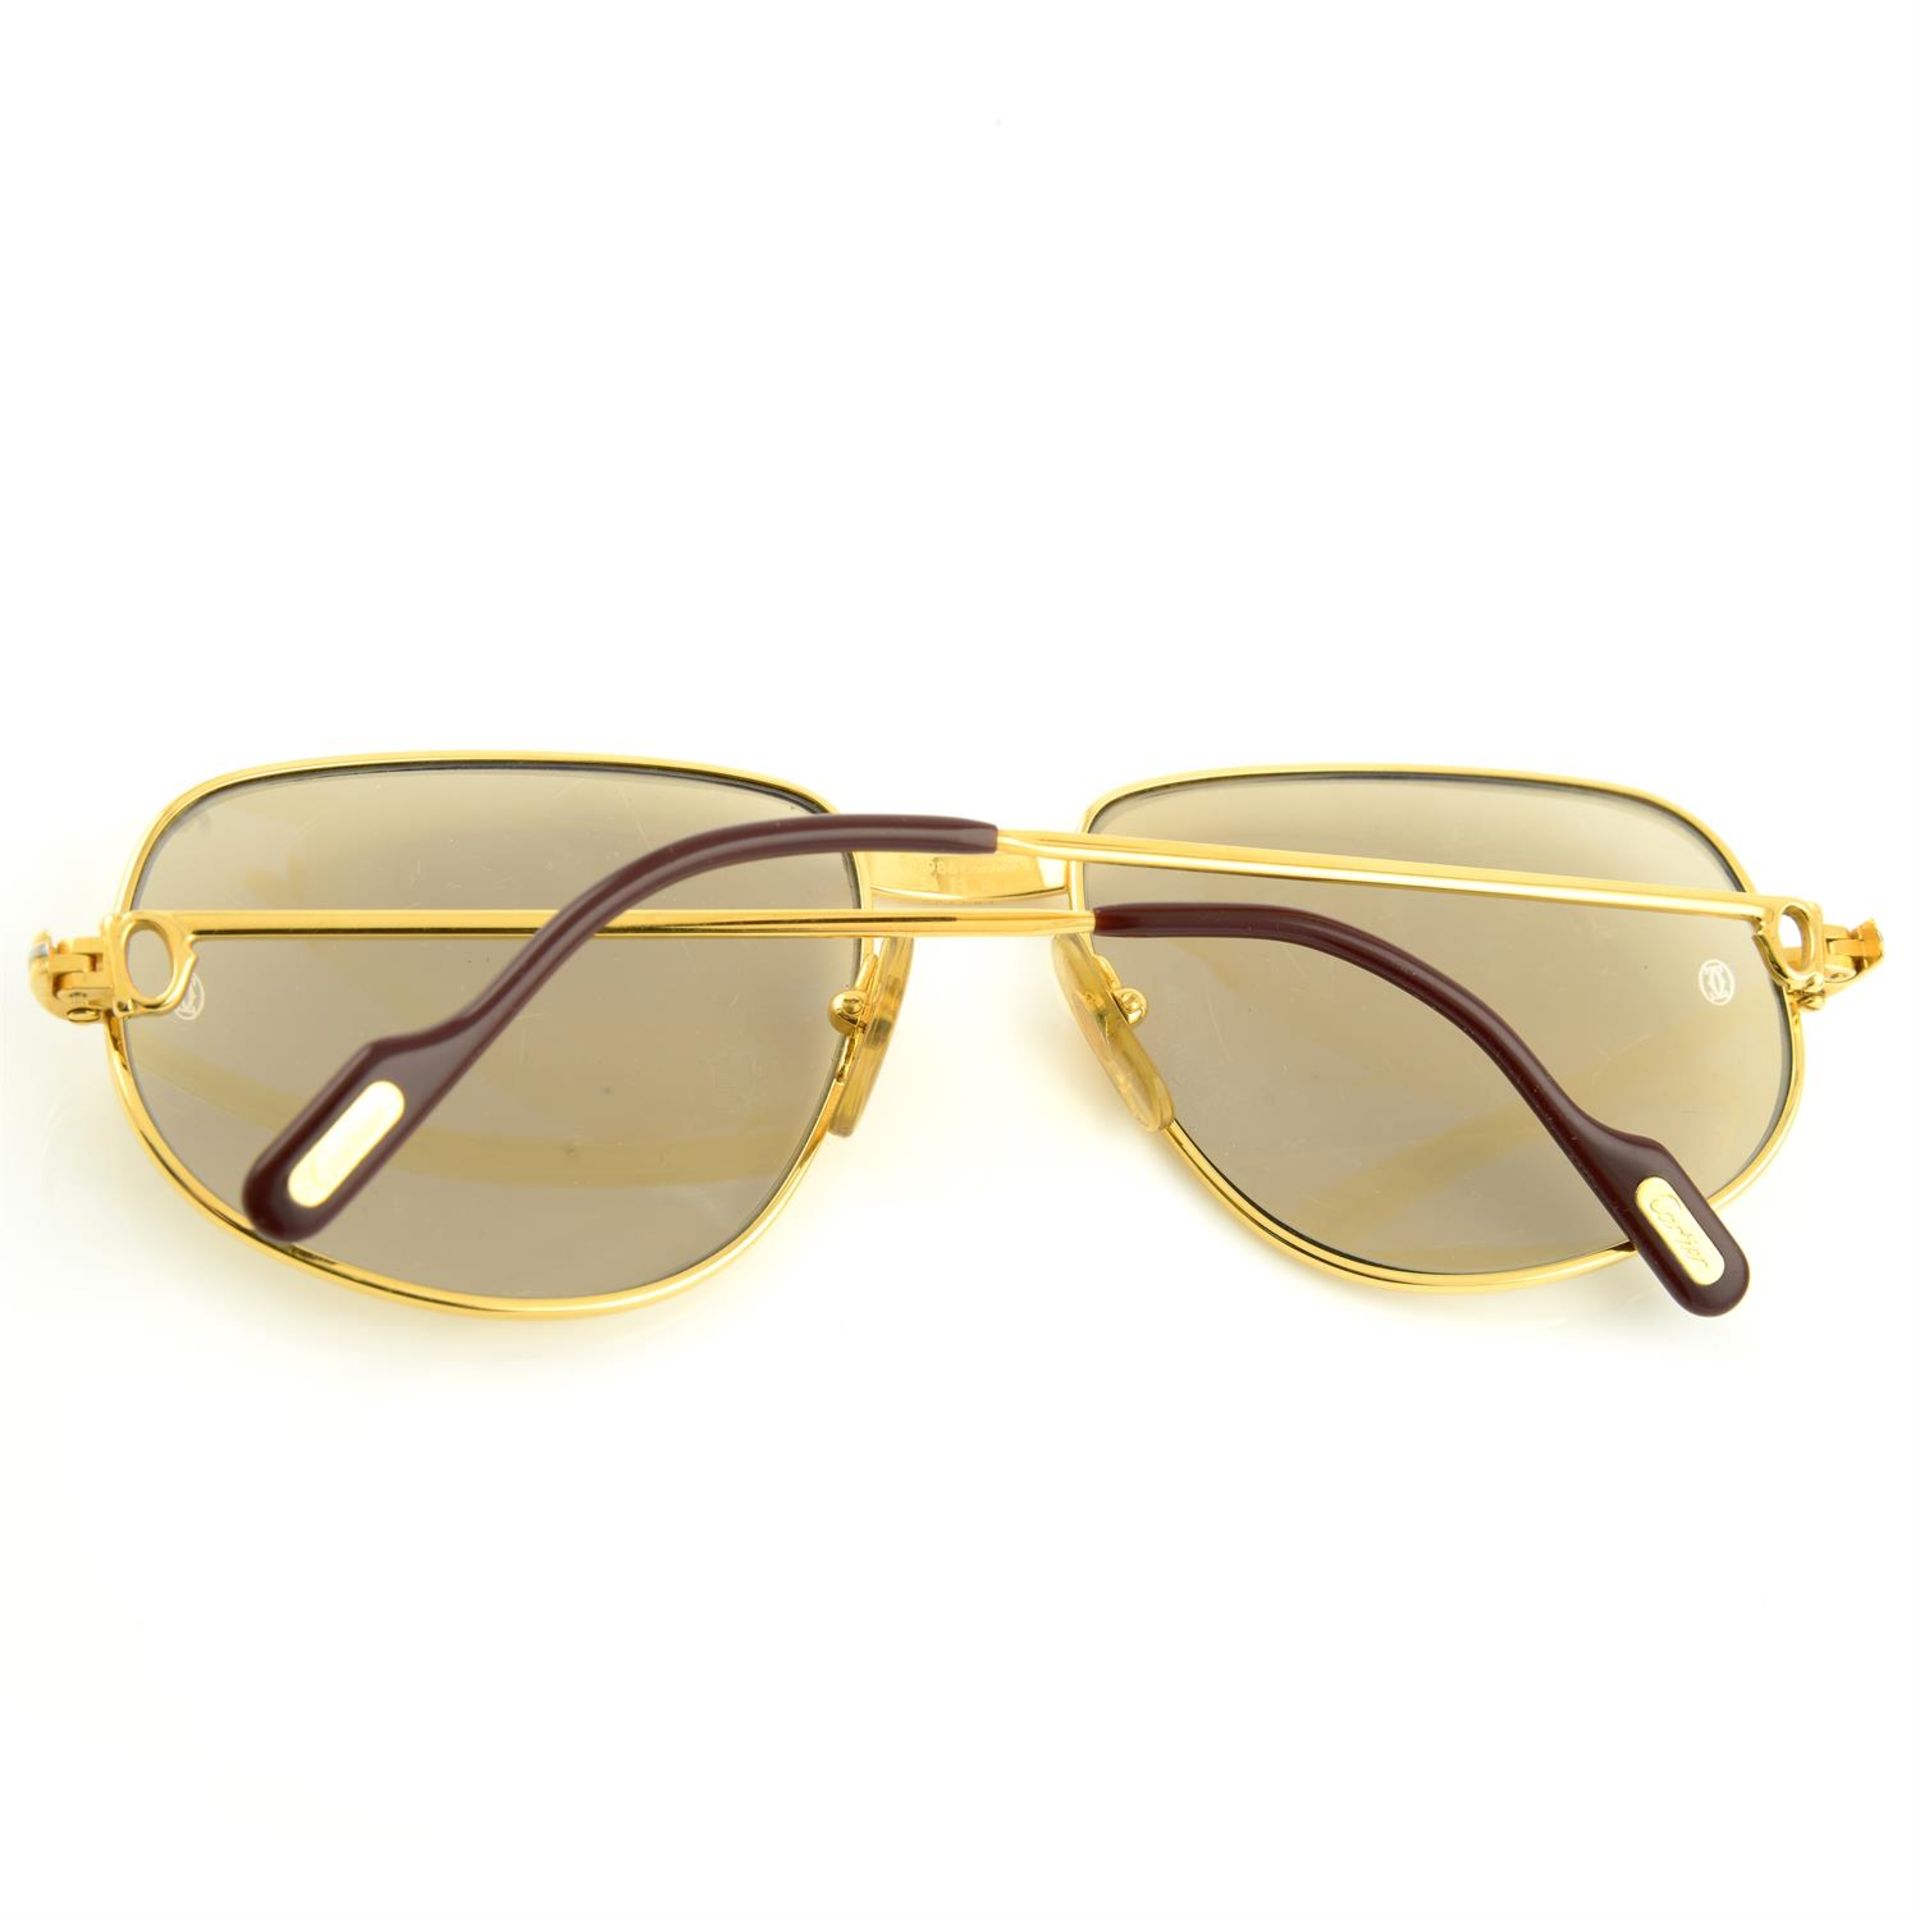 CARTIER - a pair of sunglasses. - Image 2 of 3